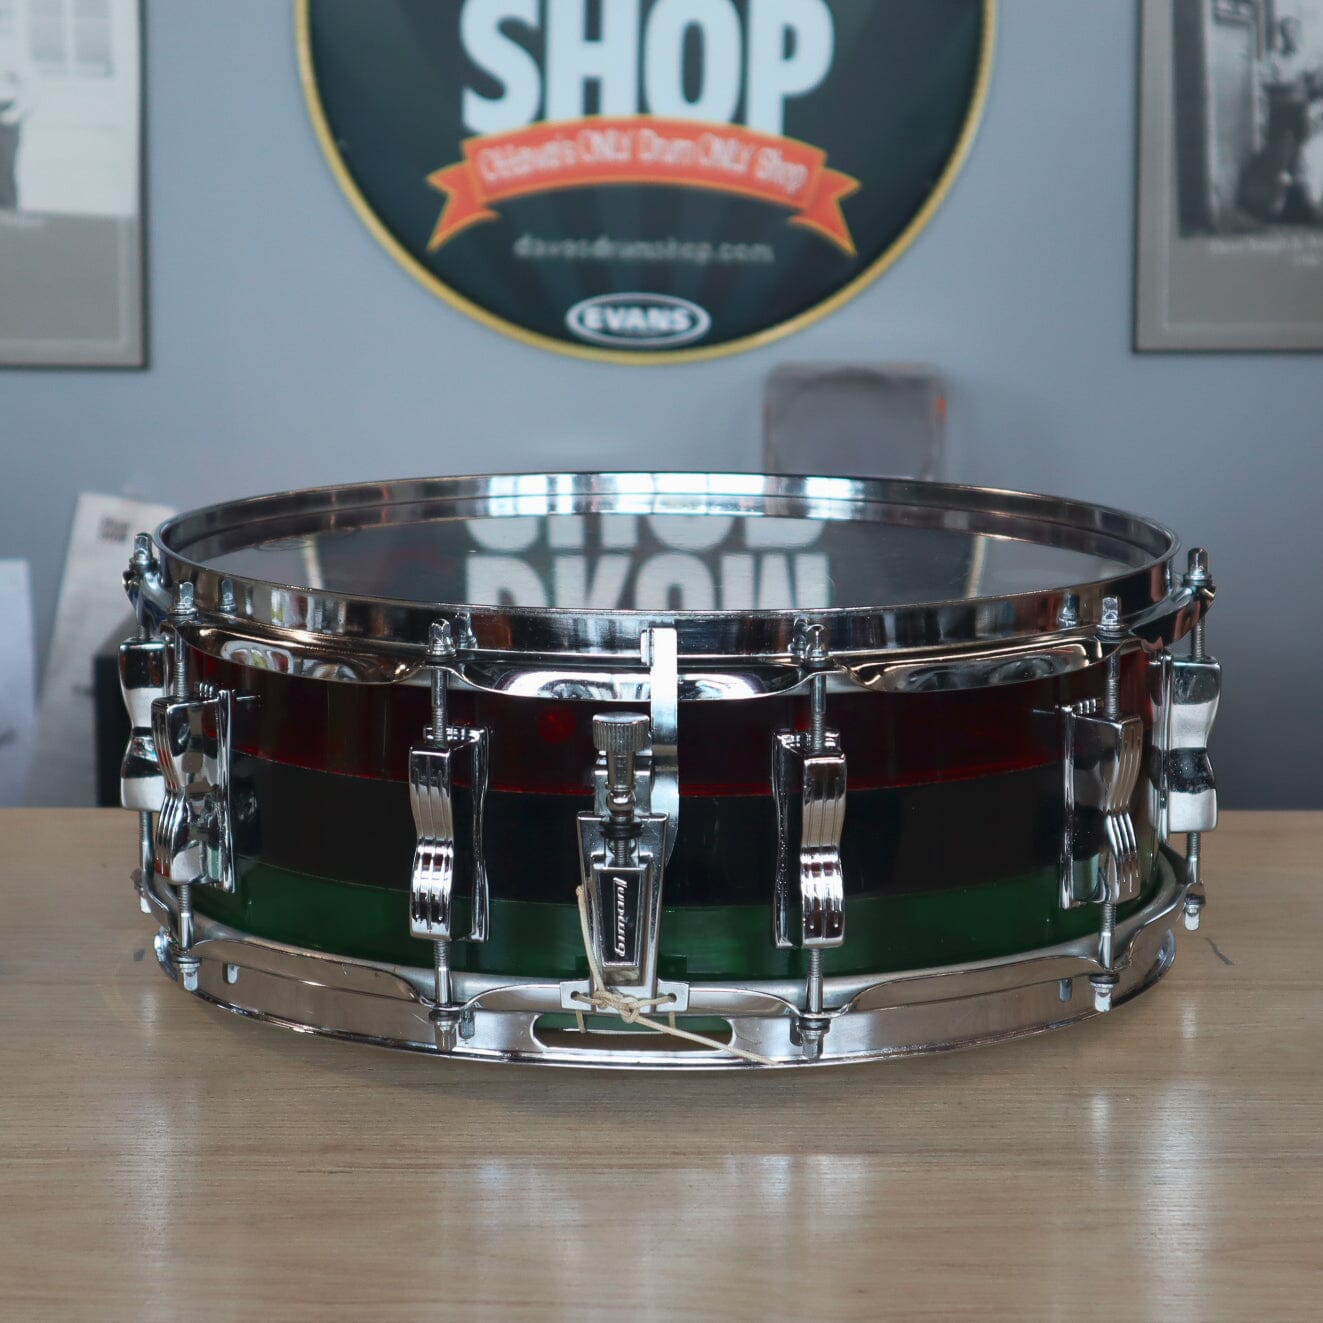 LUDWIG PATTERN A SNARE 14" x 5" Red/Black/Green CONSIGNMENT DRUM KIT LUDWIG 